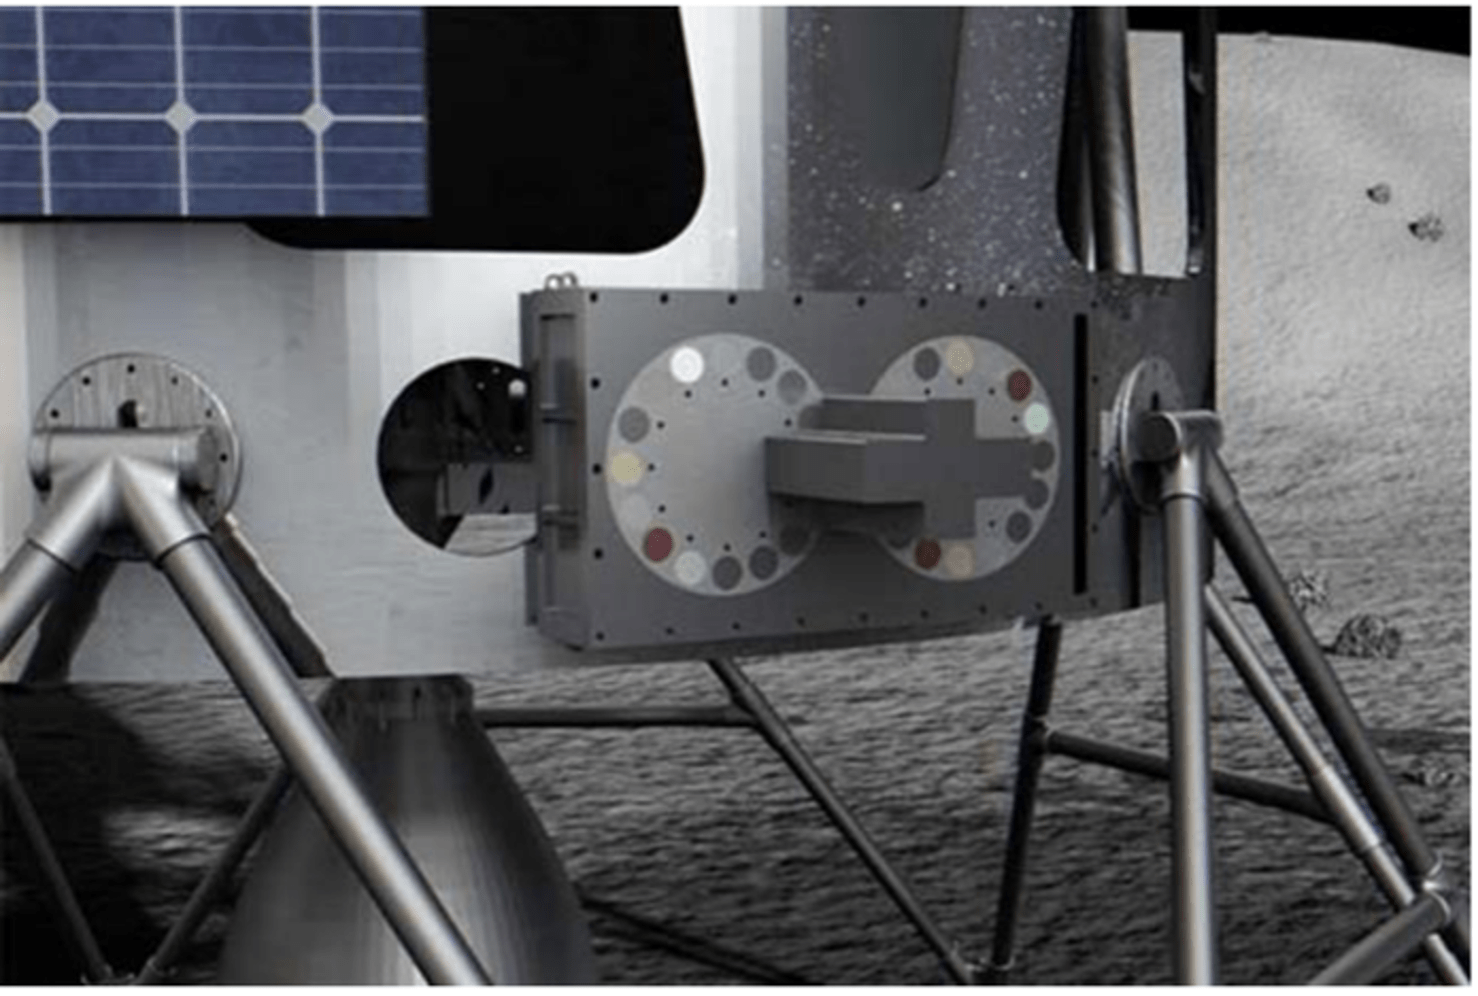 A graphic image of the device is attached to the outside of a lander. Only the bottom corner of the lander is shown to focus on the mounted device. The rectangular, grey instrument shows its two identical sample wheels side by side with samples varying in color.